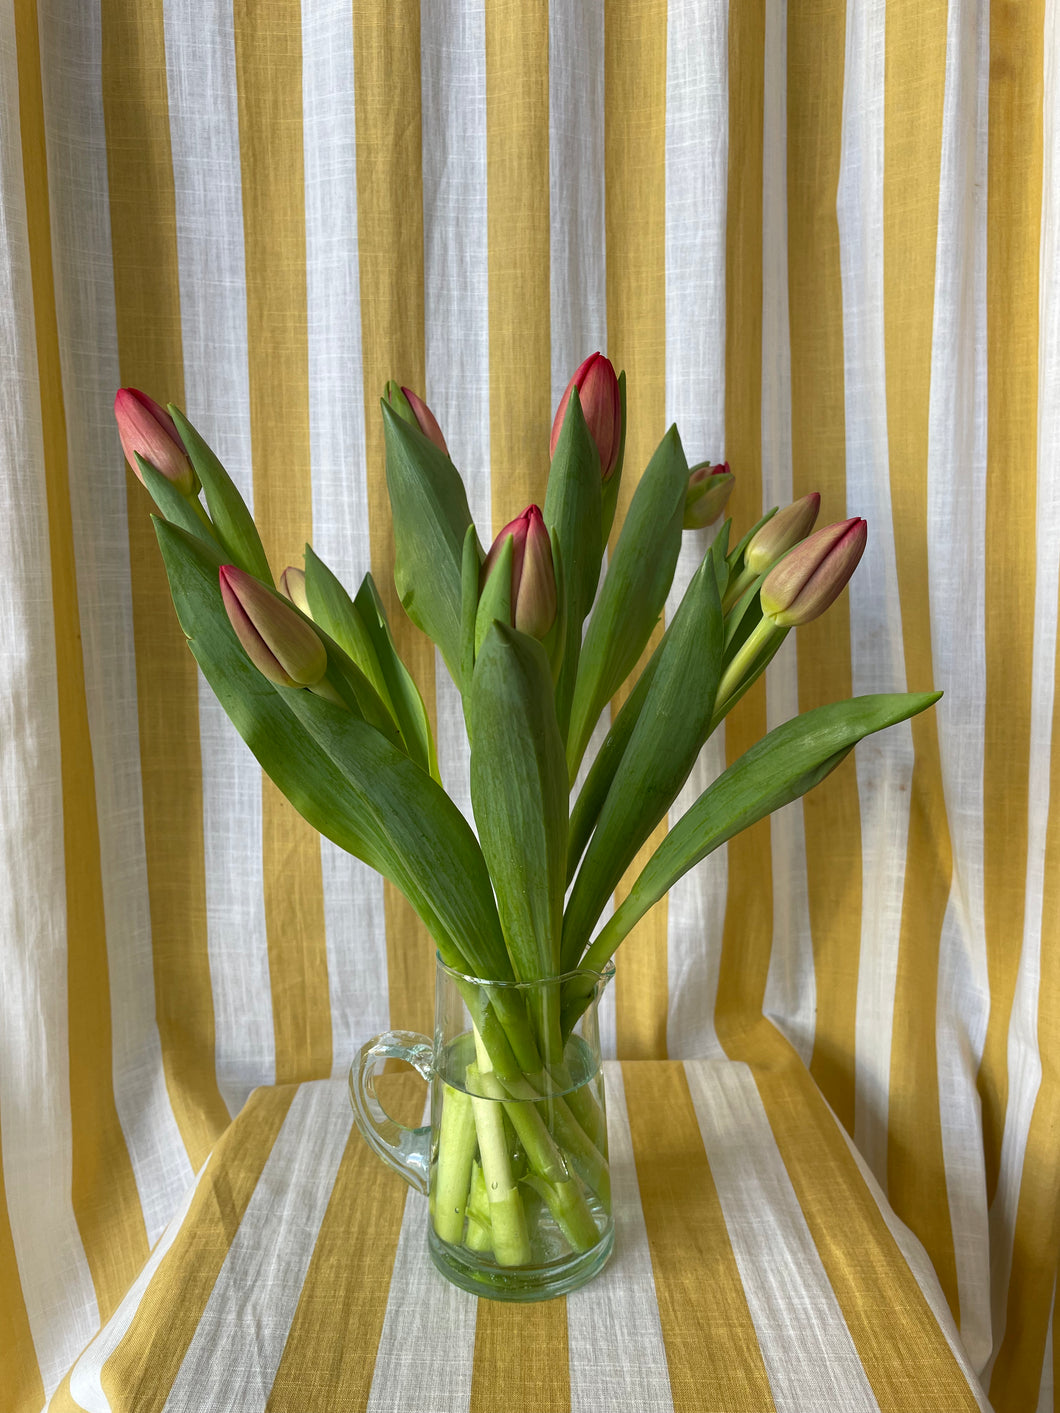 Tulips in a Recycled Glass Jug